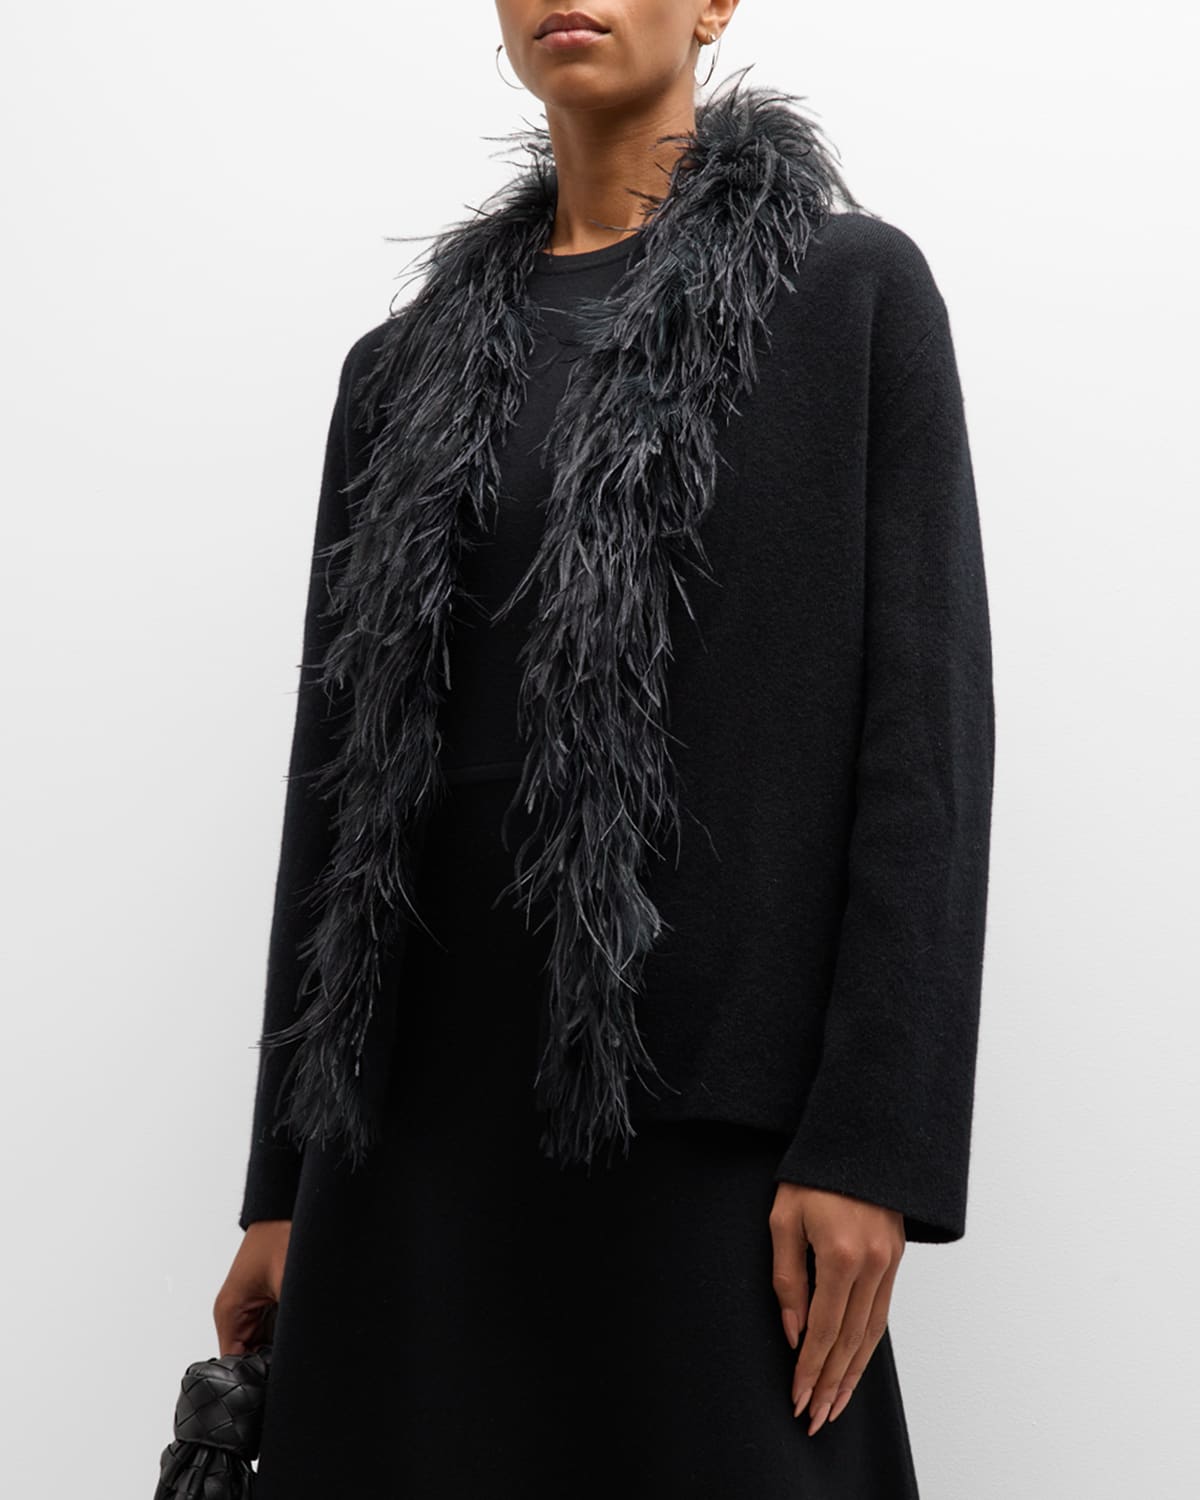 Neiman Marcus Cashmere Double-knit Top Coat With Feather Trim In Black